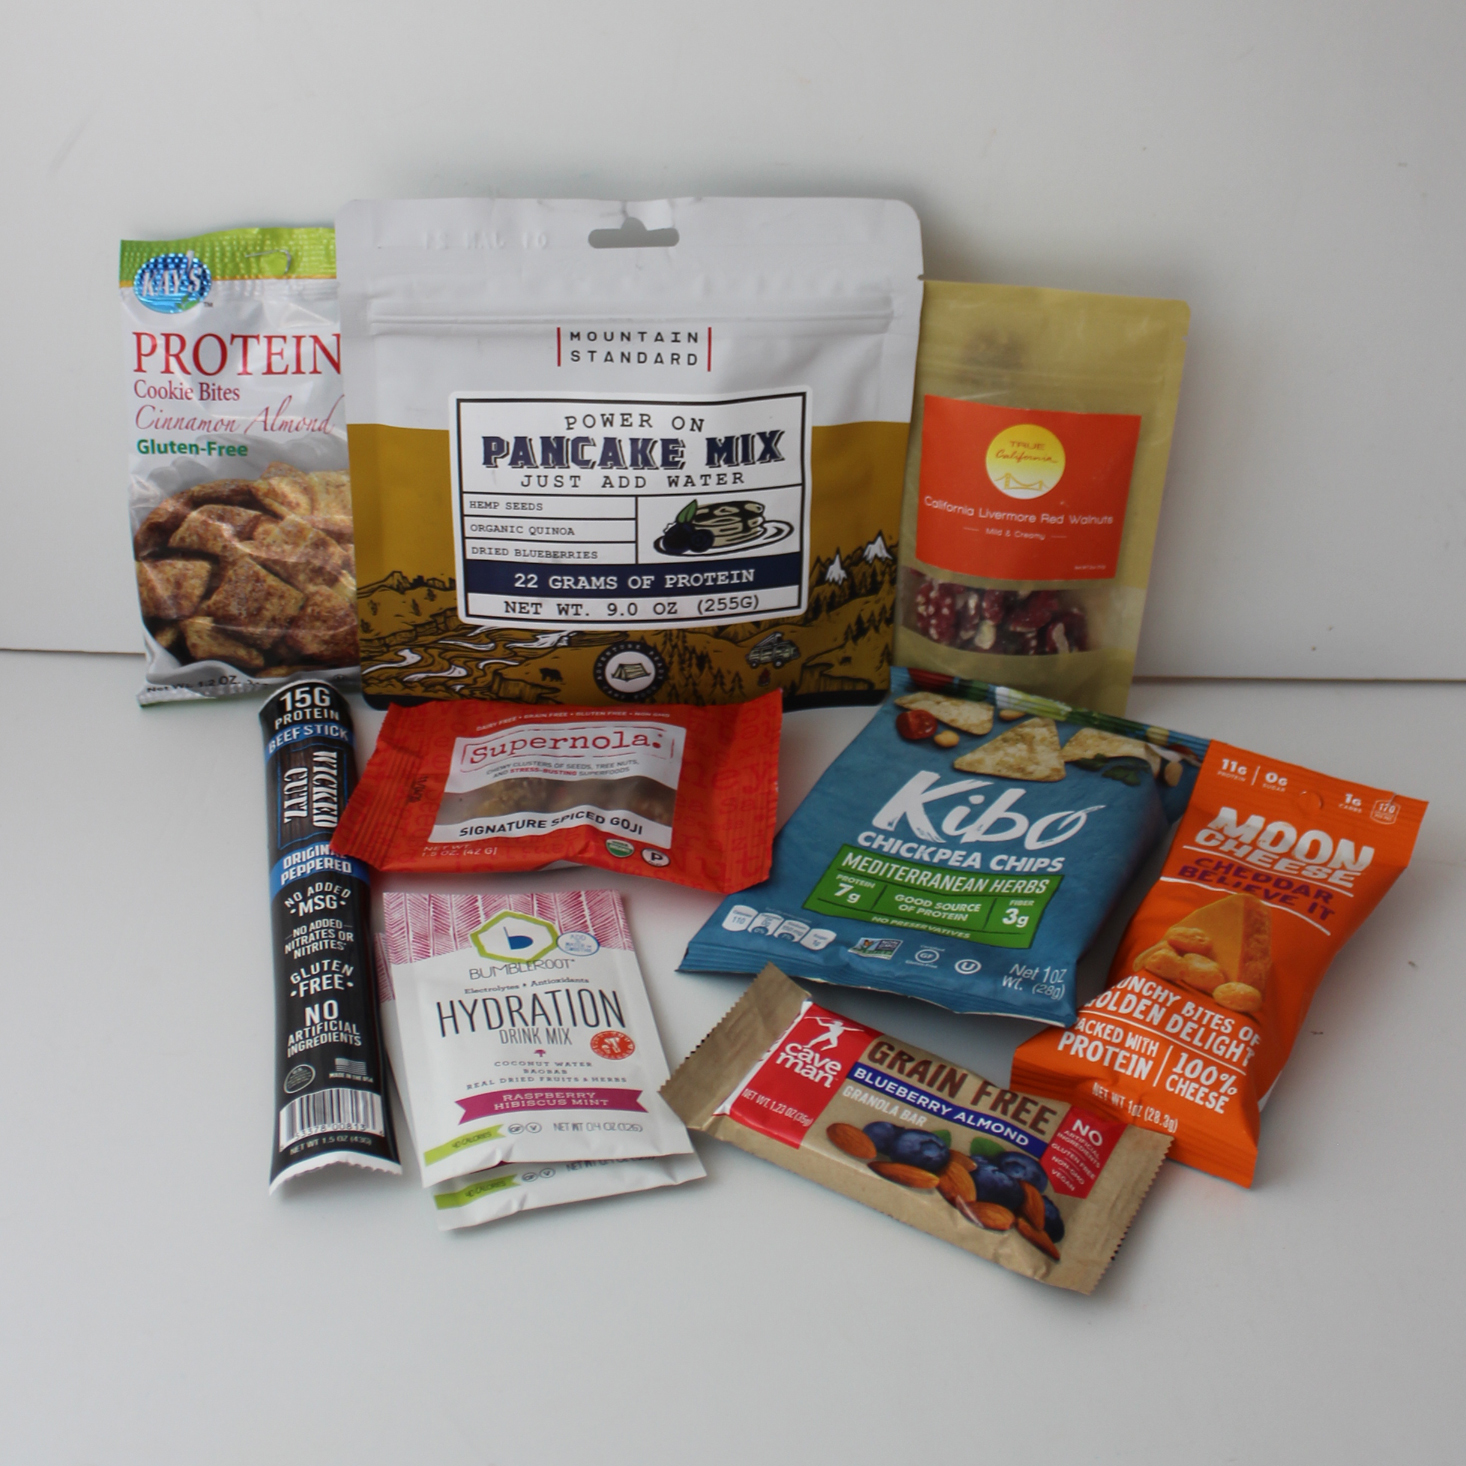 Fit Snack Subscription Box Review - February 2020 | MSA